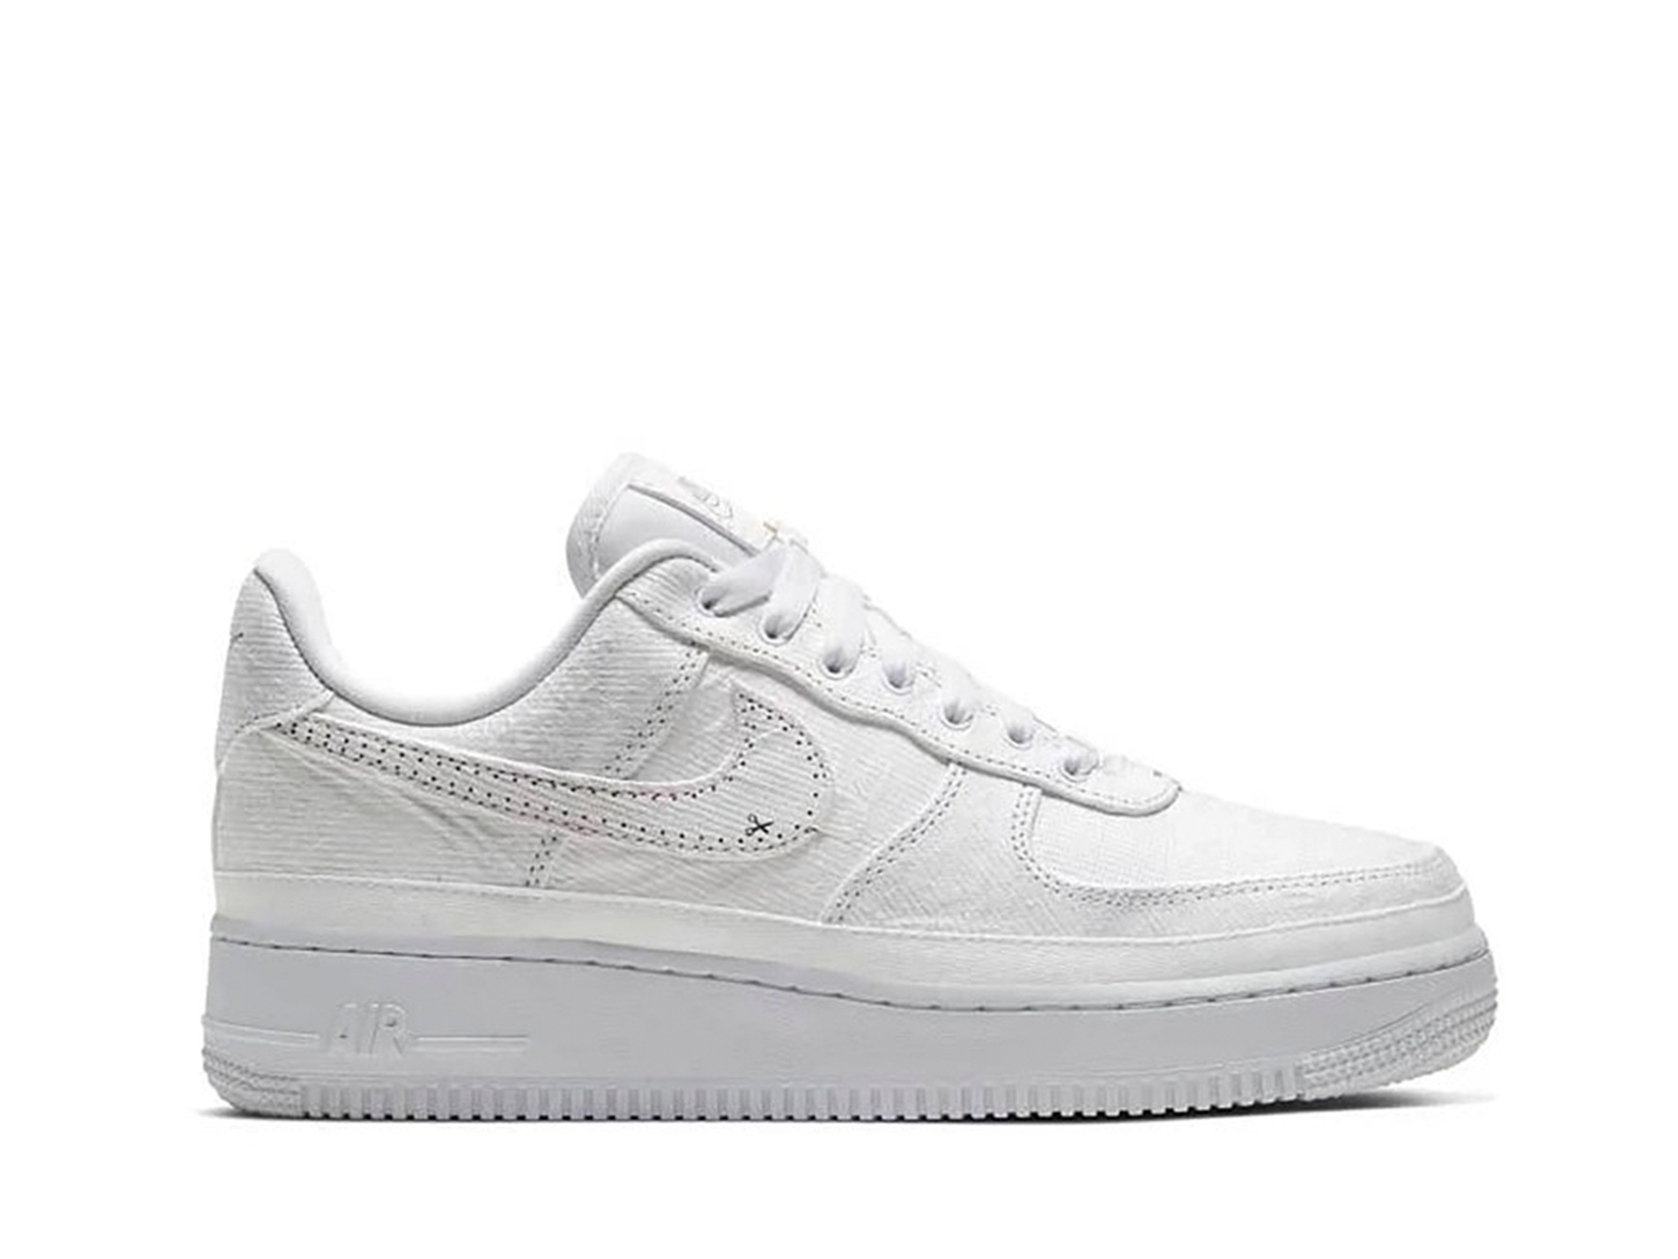 Double Boxed  199.99 Nike Air Force 1 LX Tear Away 'Reveal' White (W) Double Boxed